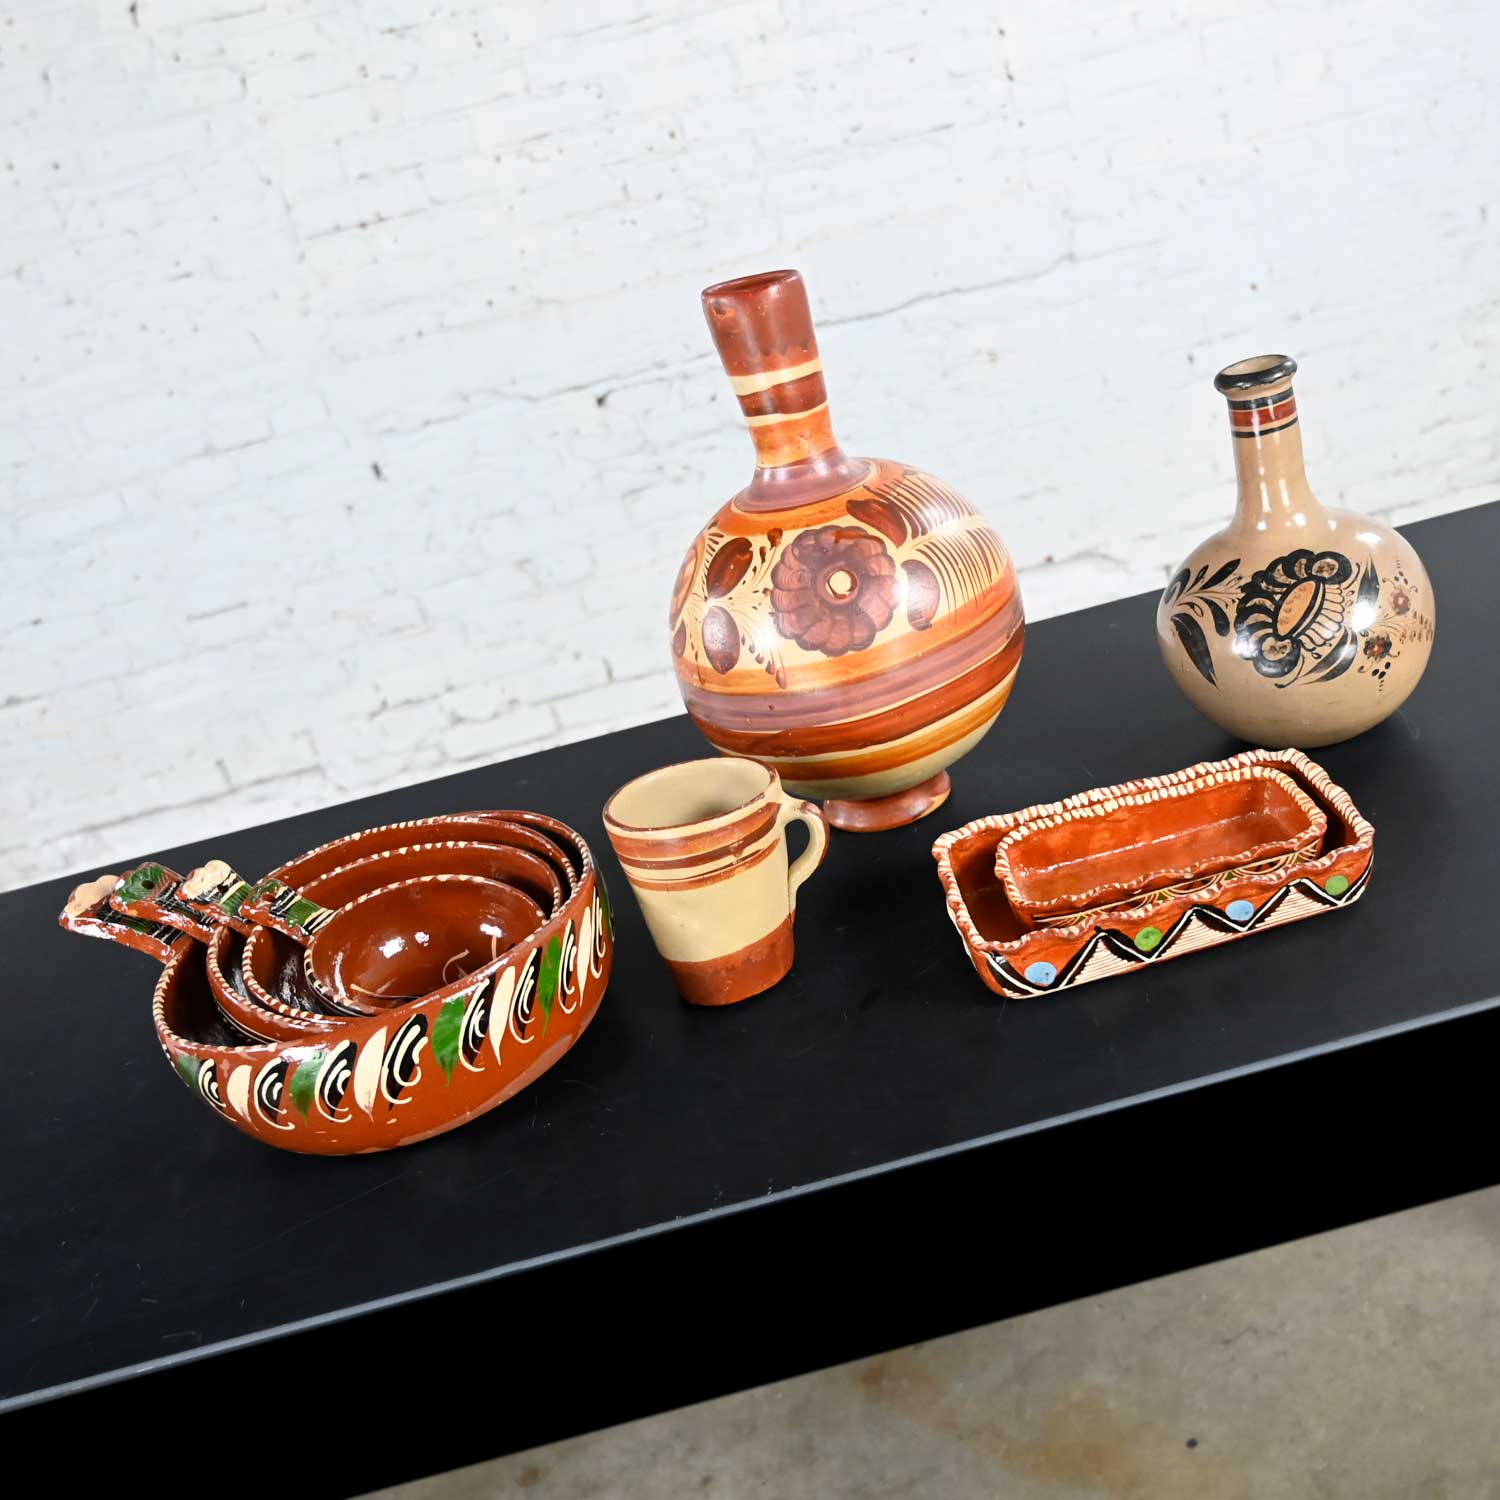 Vintage Selection of Mexican Pottery 4 Nesting Bowls 2 Nesting Baking Dishes 1 Carafe & Cup & 1 Bottle